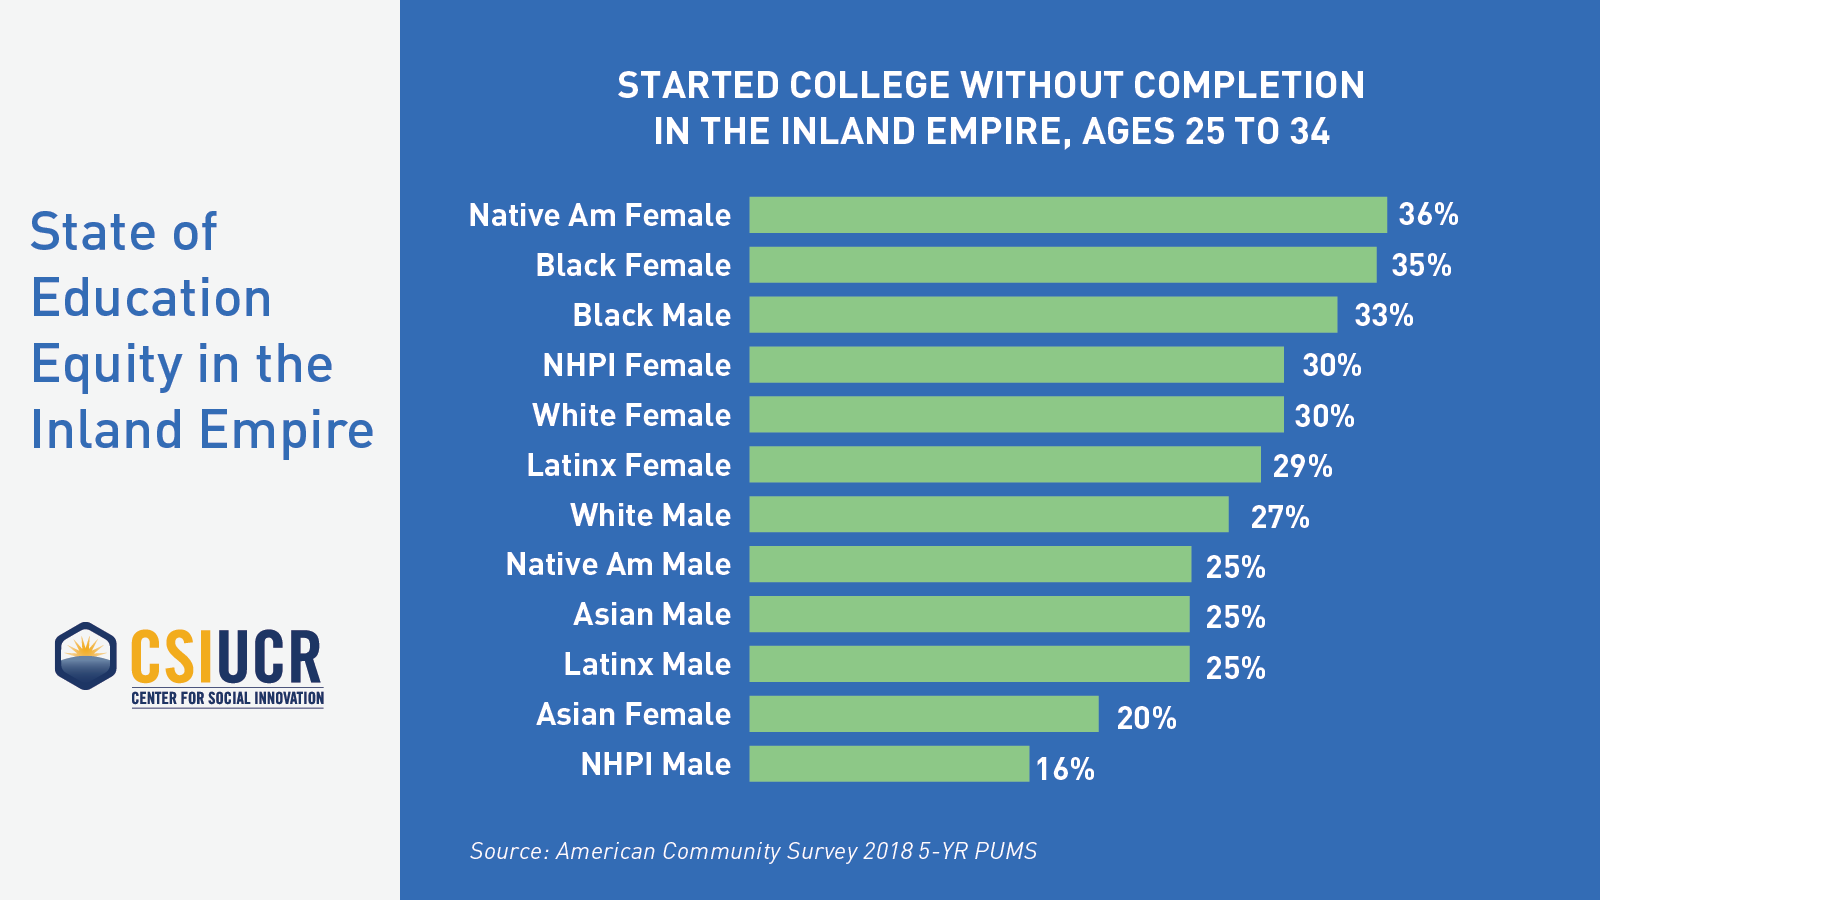 Started College Without Completion in the IE, ages 25 to 34(2018)